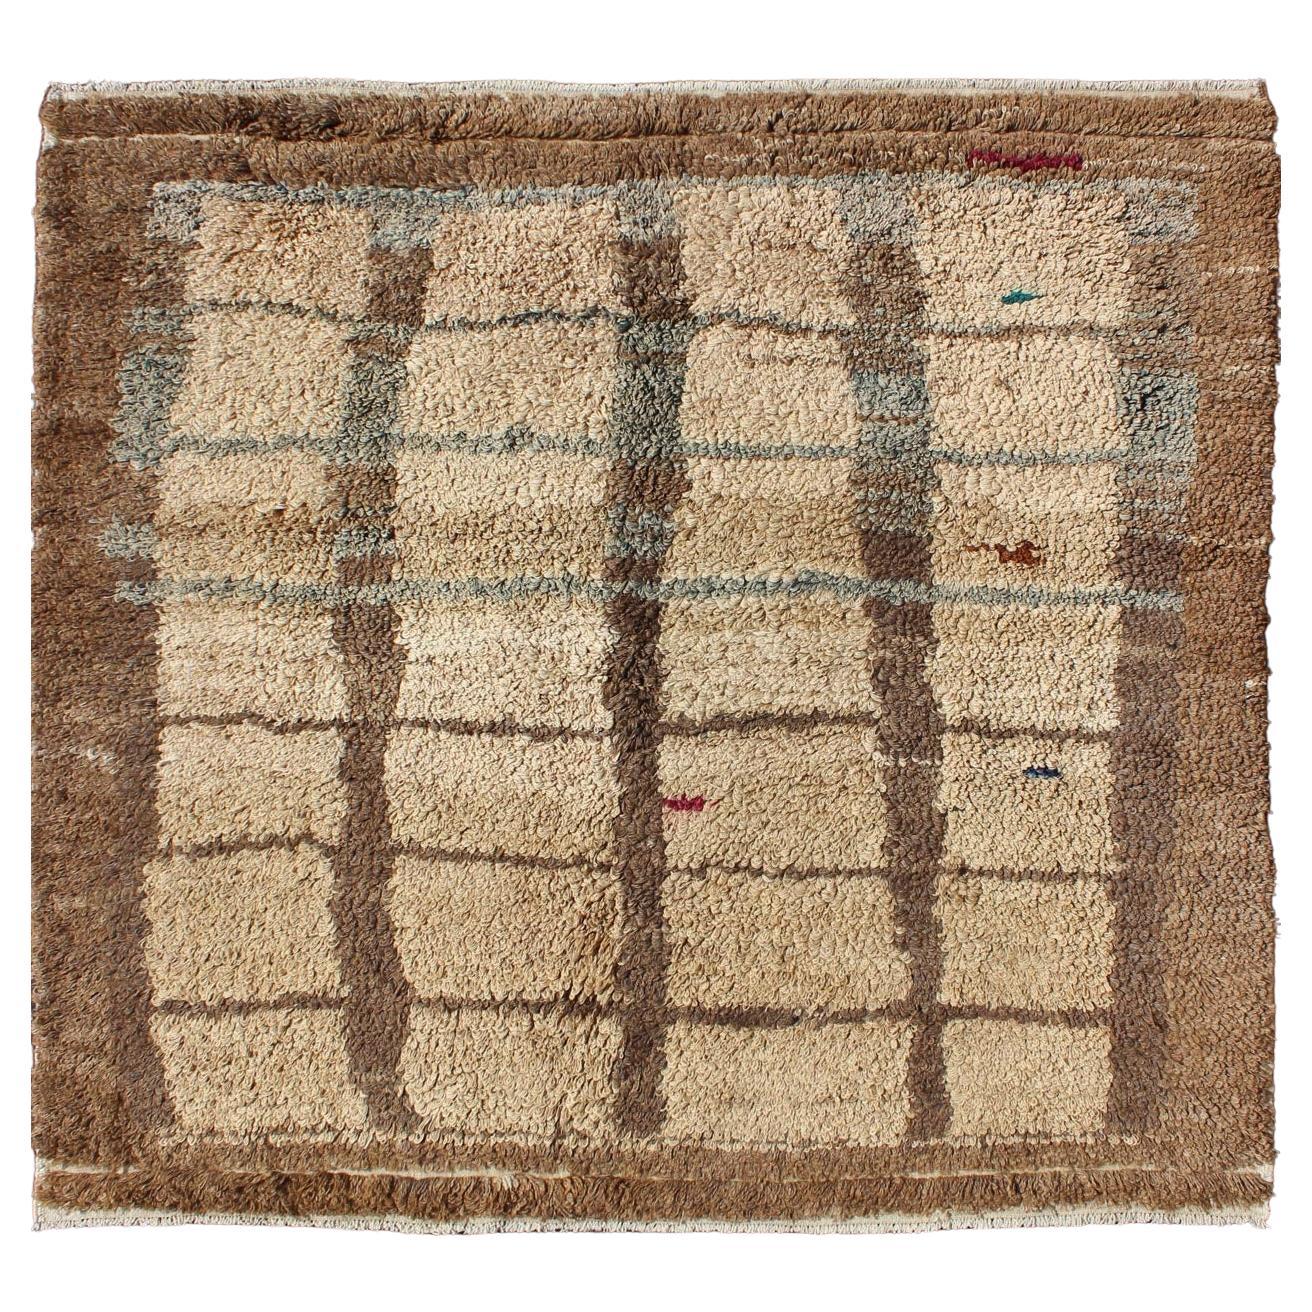 Turkish Vintage Tulu Rug with Modern Simple Square Design in Tan and Brown